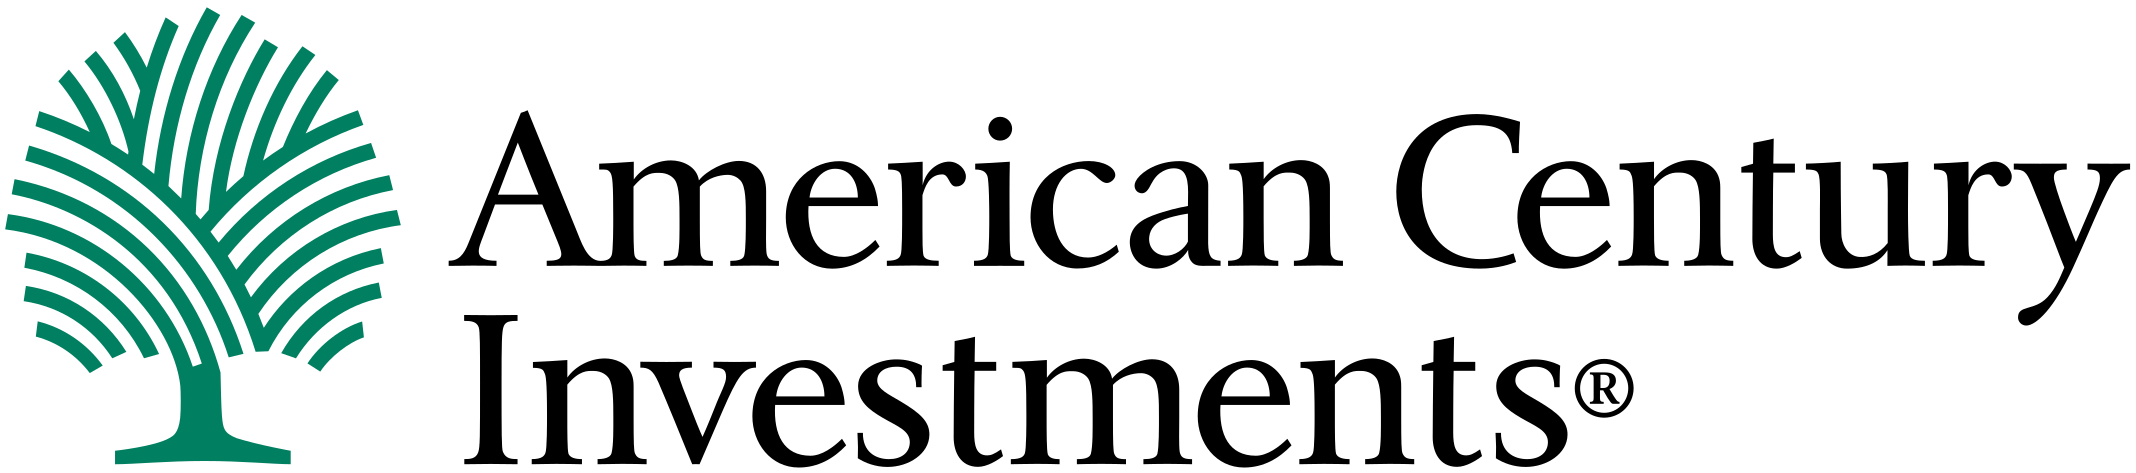 American Century Investments